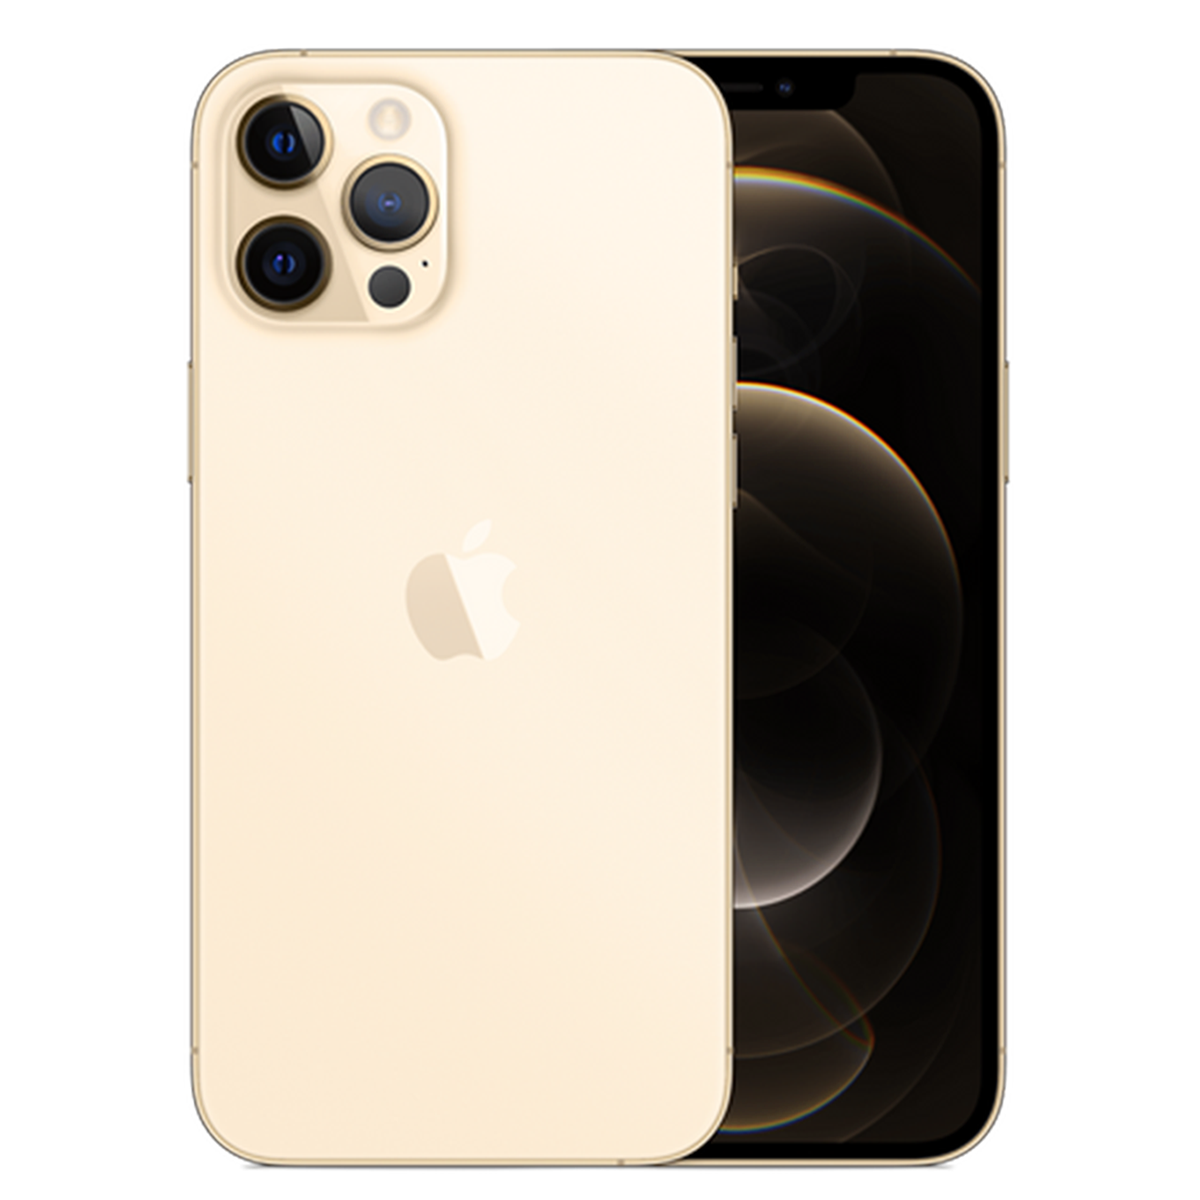 iPhone 12 Pro Max, Gold, 128GB (Official Stock)